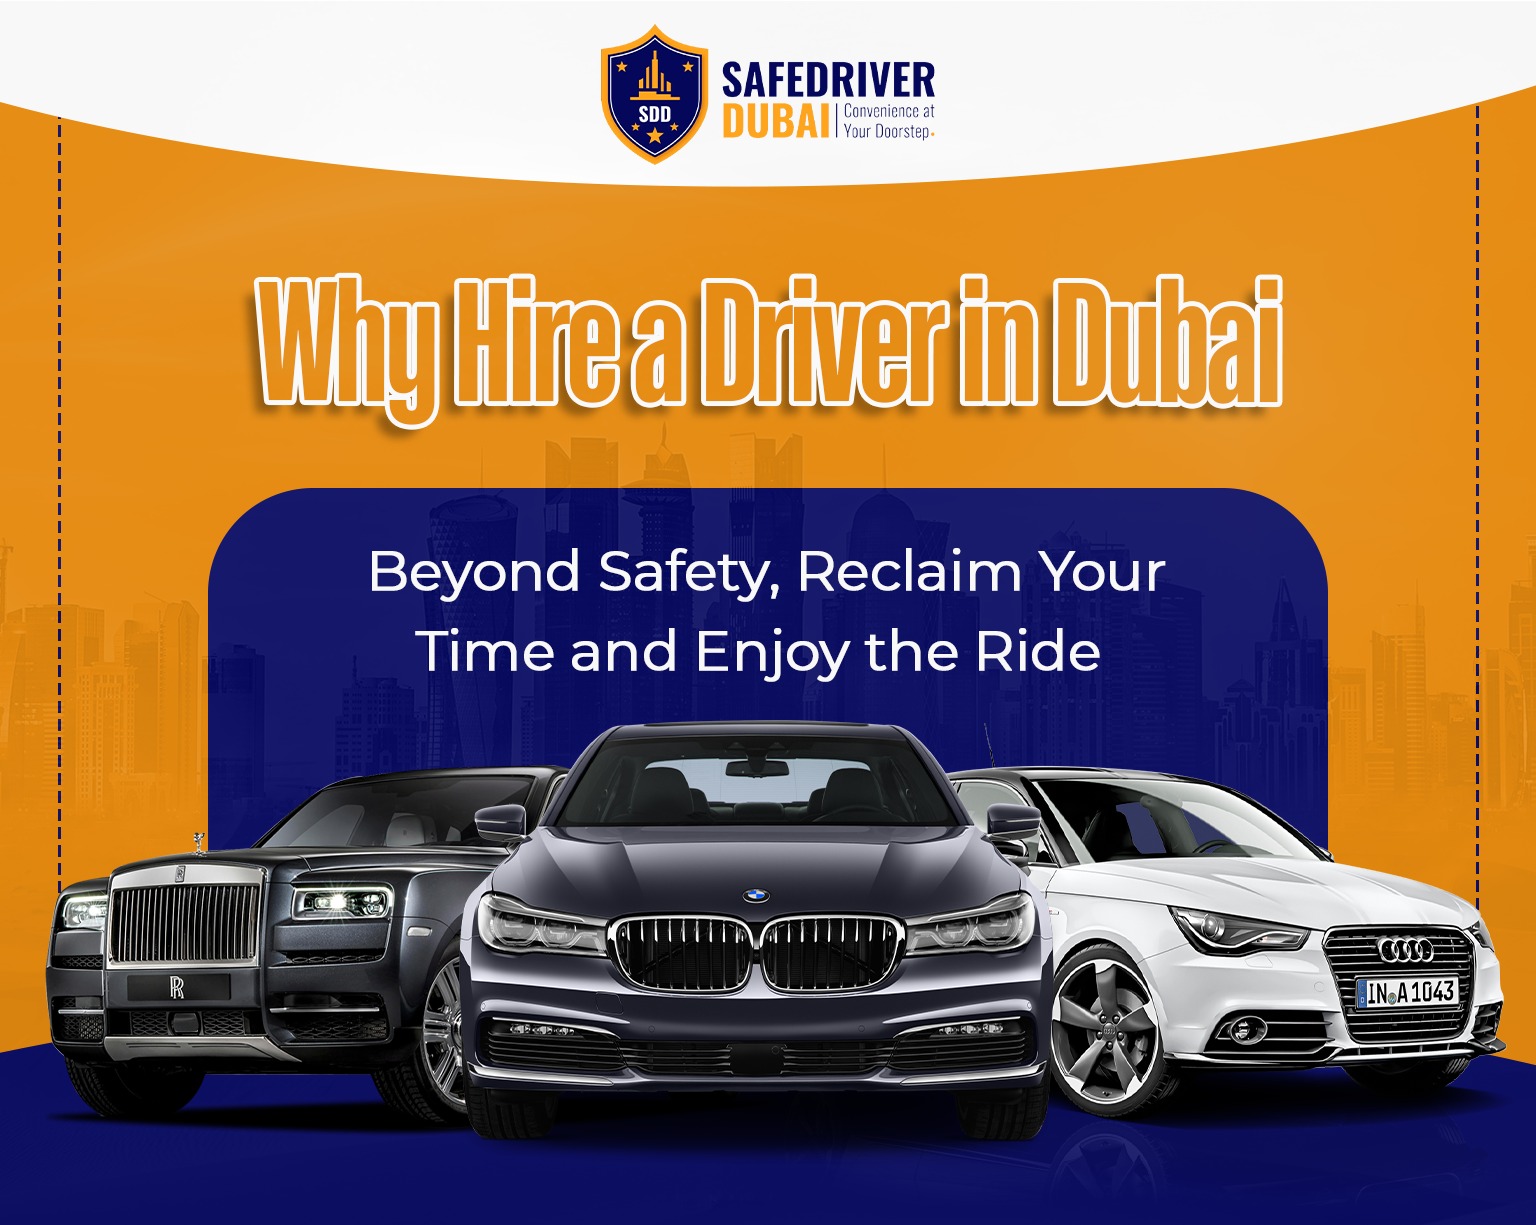 Why-Hire-a-Driver-in- Dubai-Beyond-Safety, -Reclaim-Your-Time-and-Enjoy-the-Ride